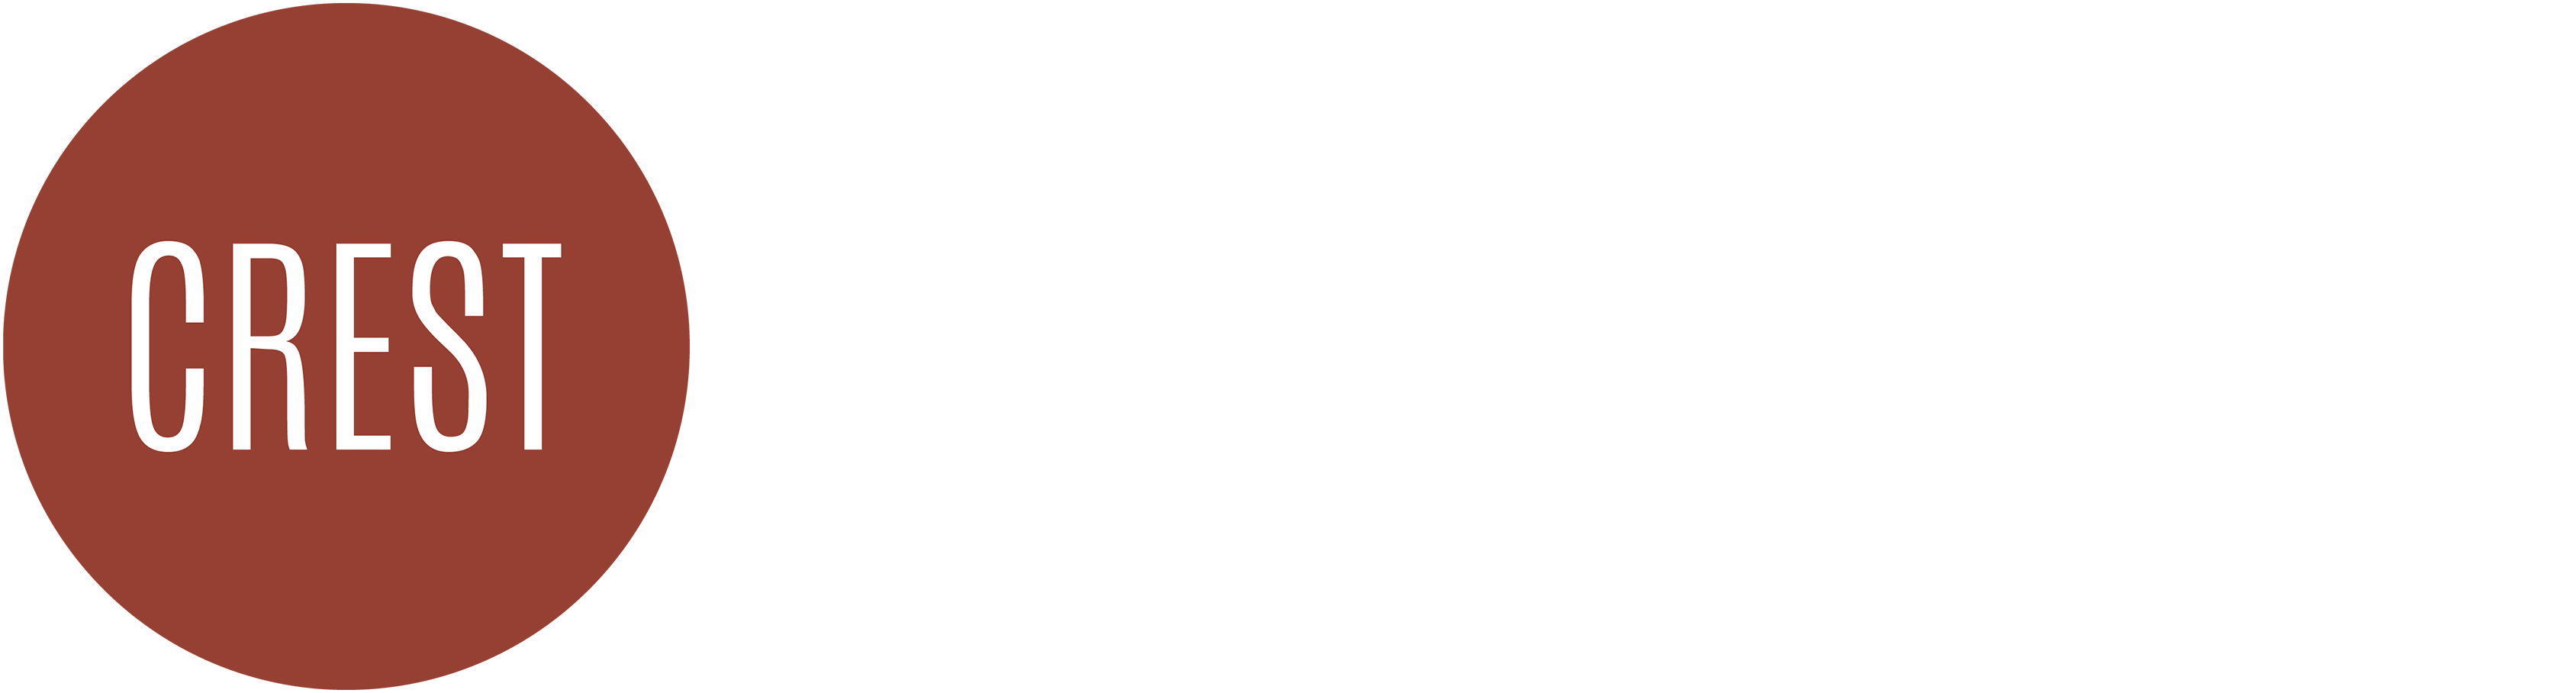 The Crest at Las Colinas Station logo.